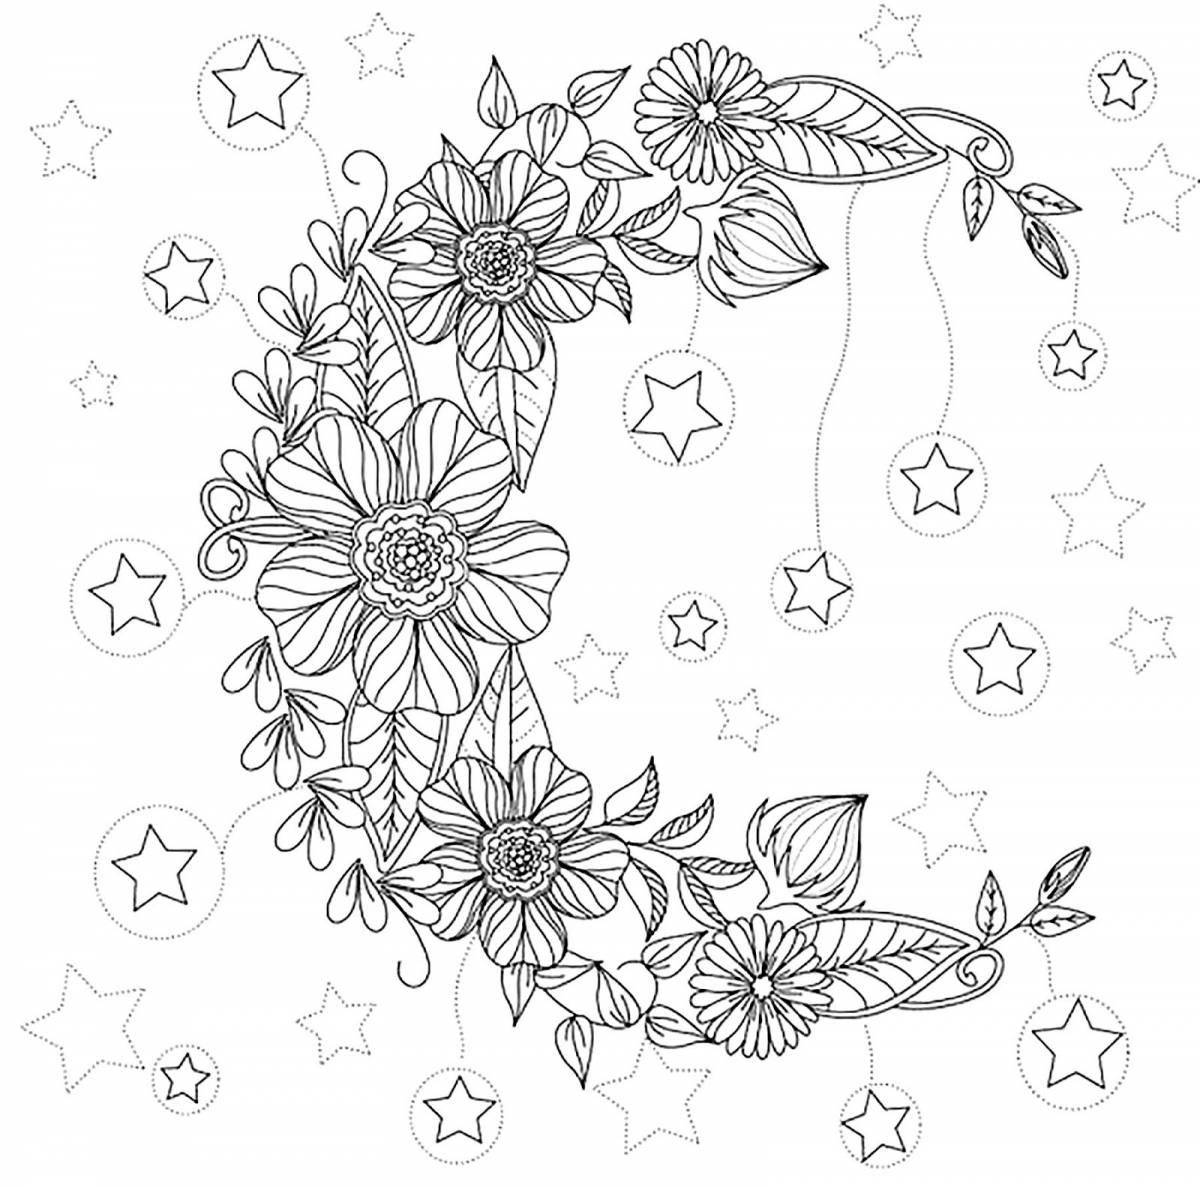 Bright coloring pages with small patterns